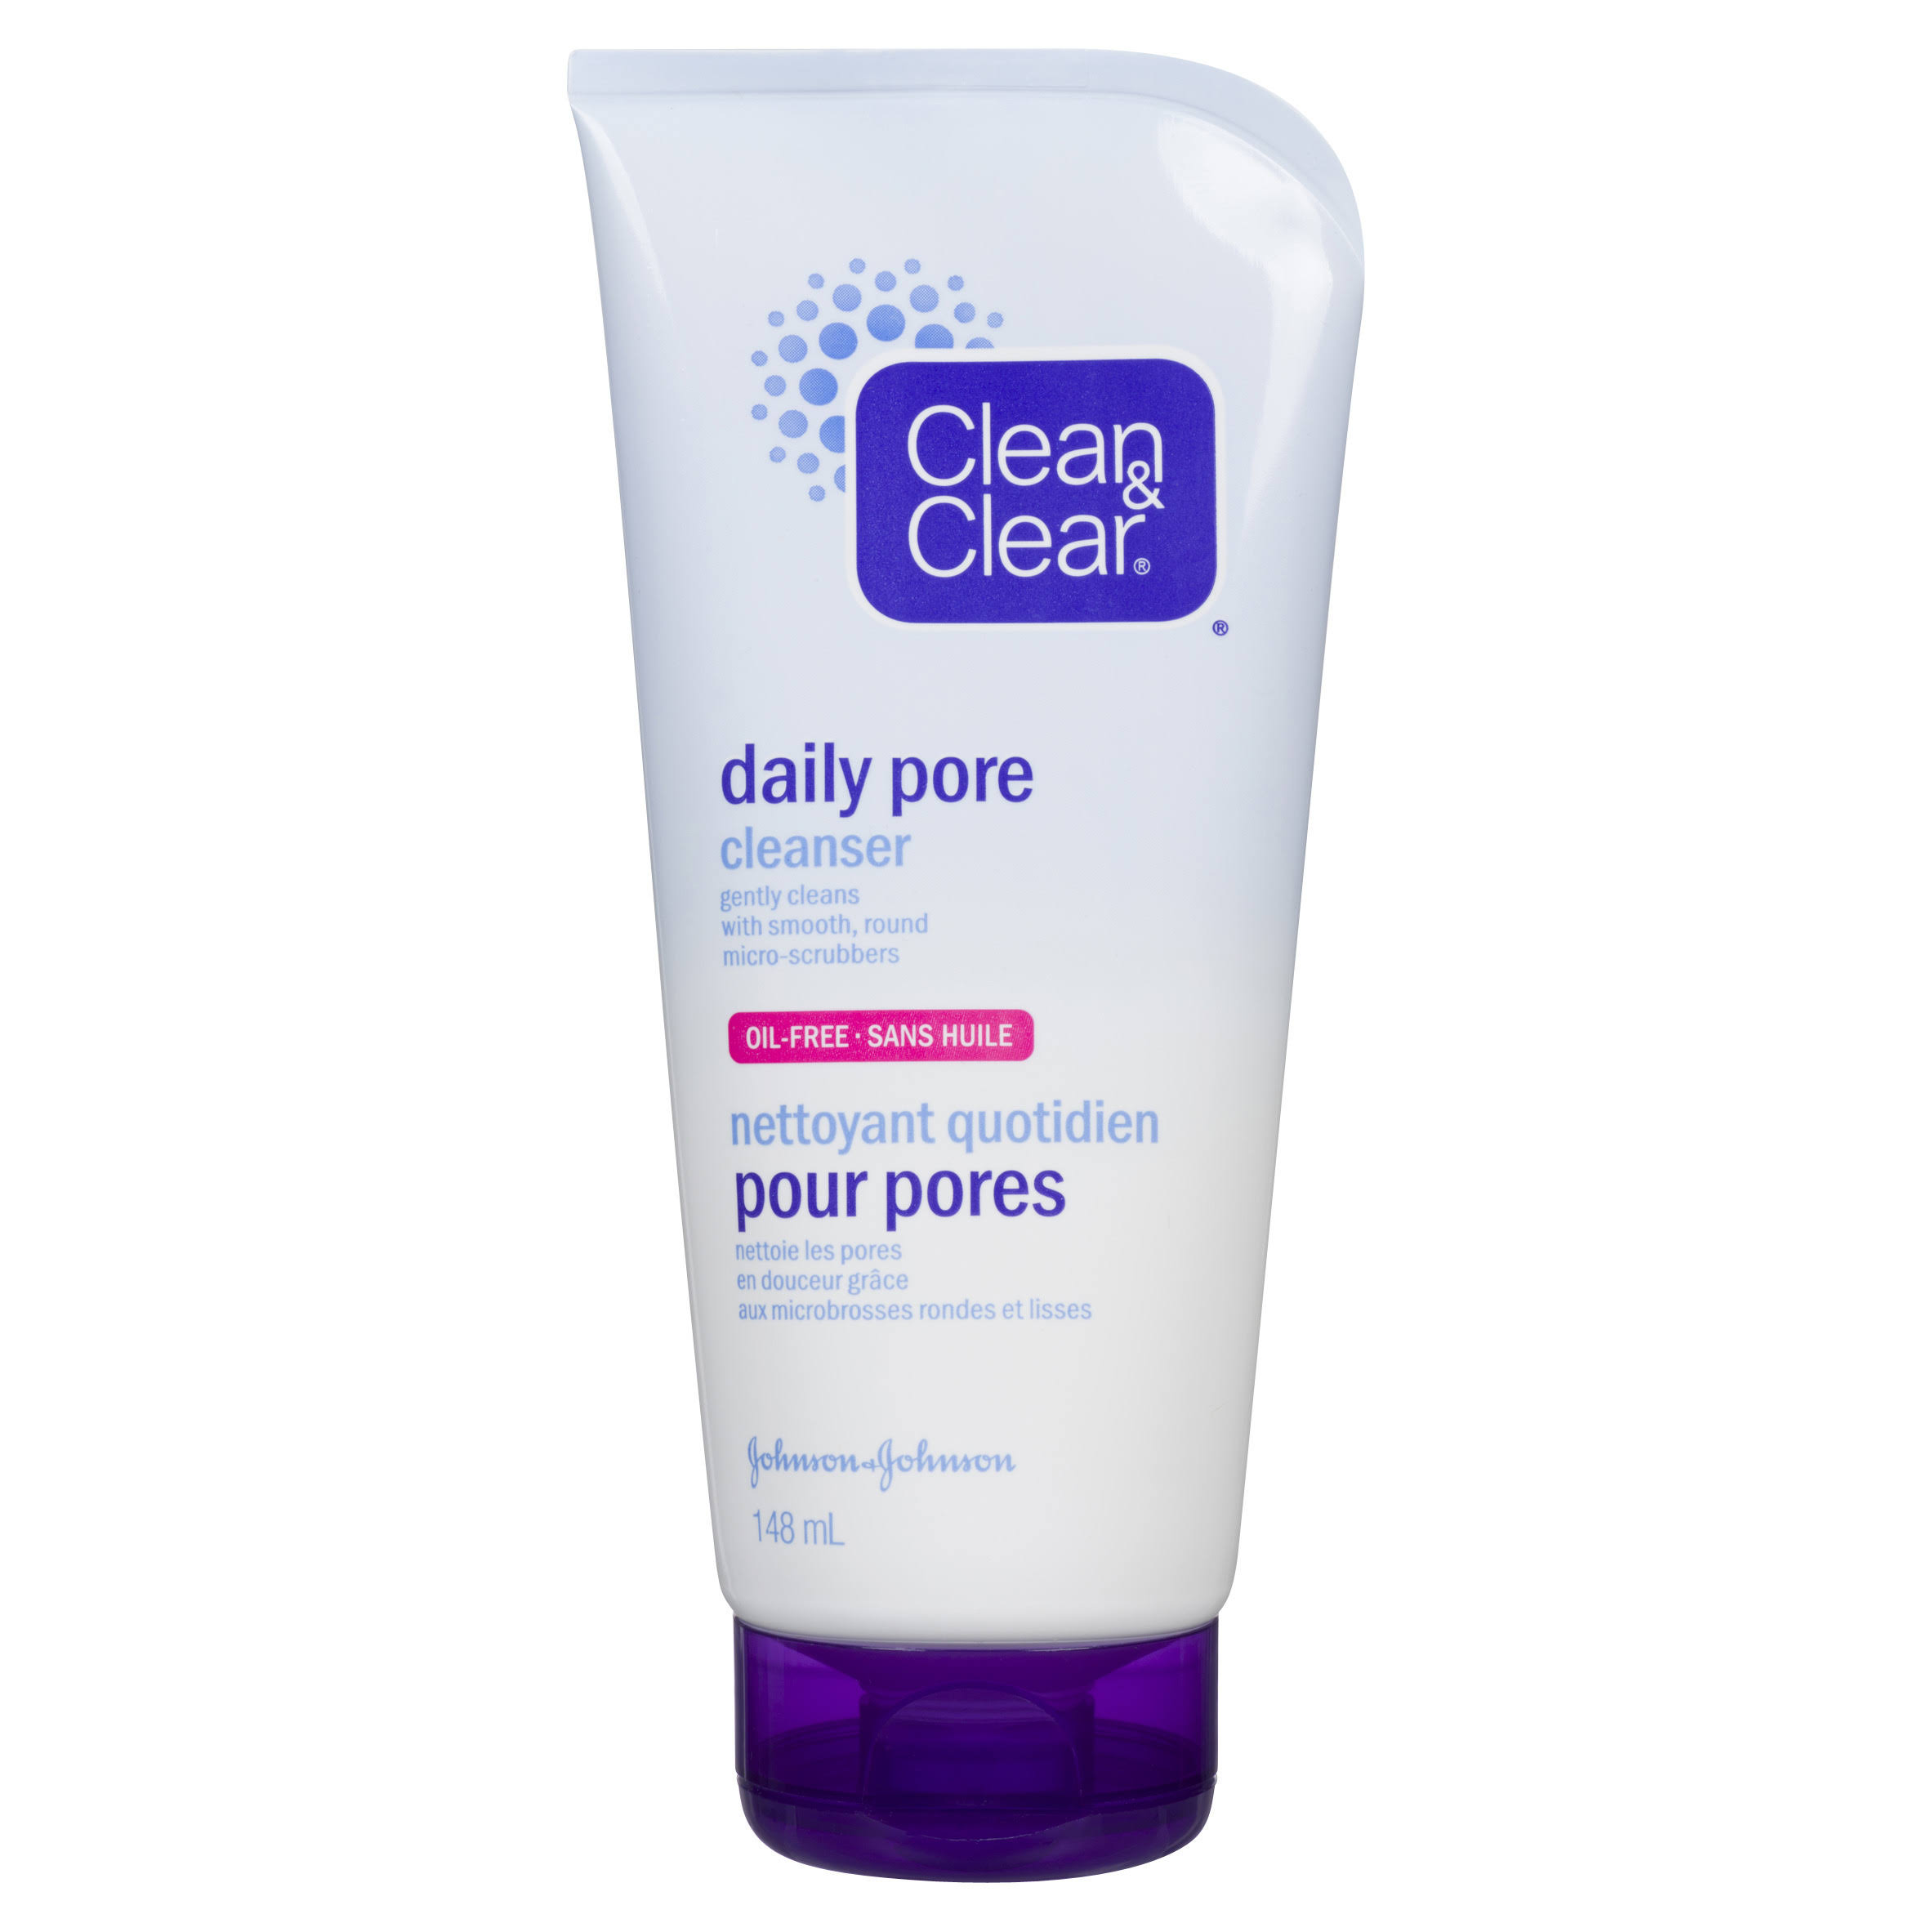 Clean and Clear Daily Pore Cleanser - 148ml